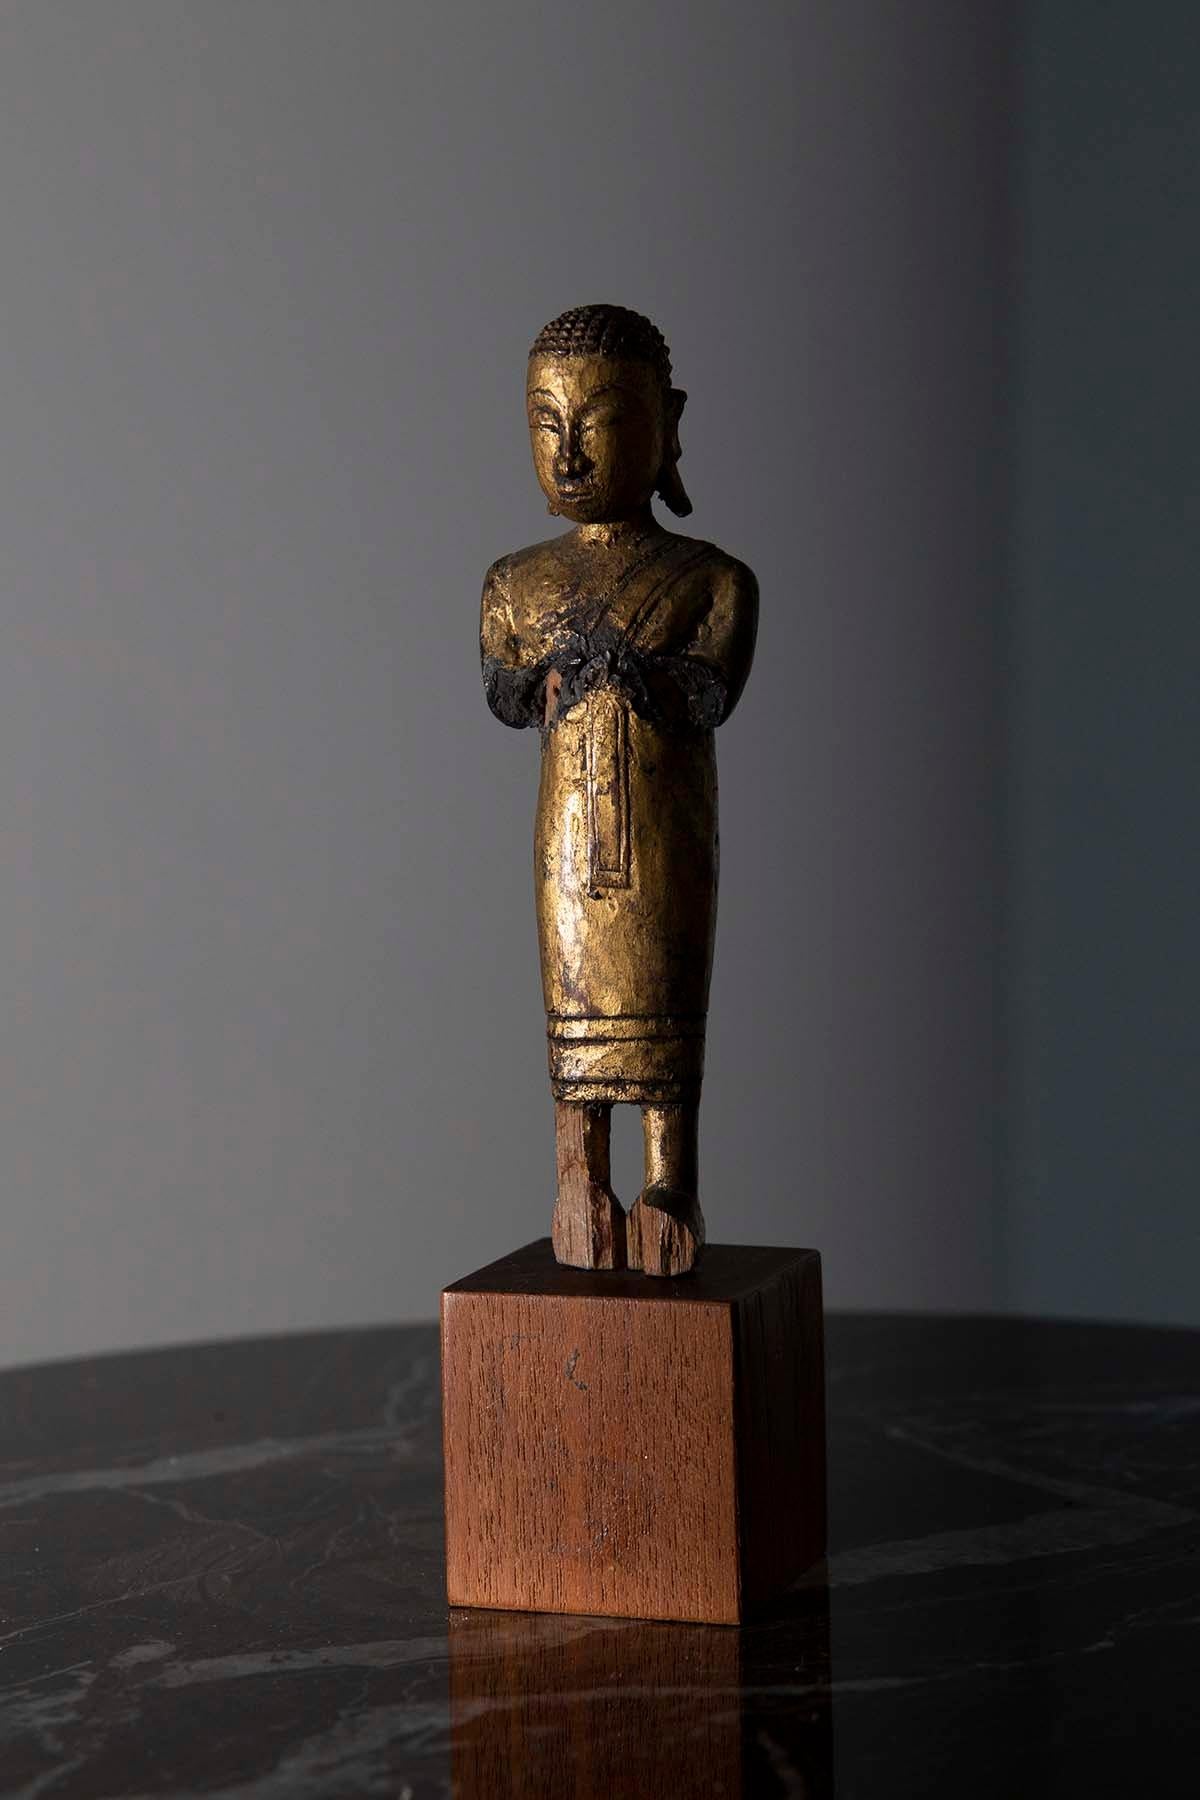 n the heart of 19th century Burma, an exquisite treasure of profound spiritual significance was born—a small, finely crafted sculpture of a Buddhist monk in prayer. This delicate work of art, lovingly hand-painted and gilded, embodies the timeless